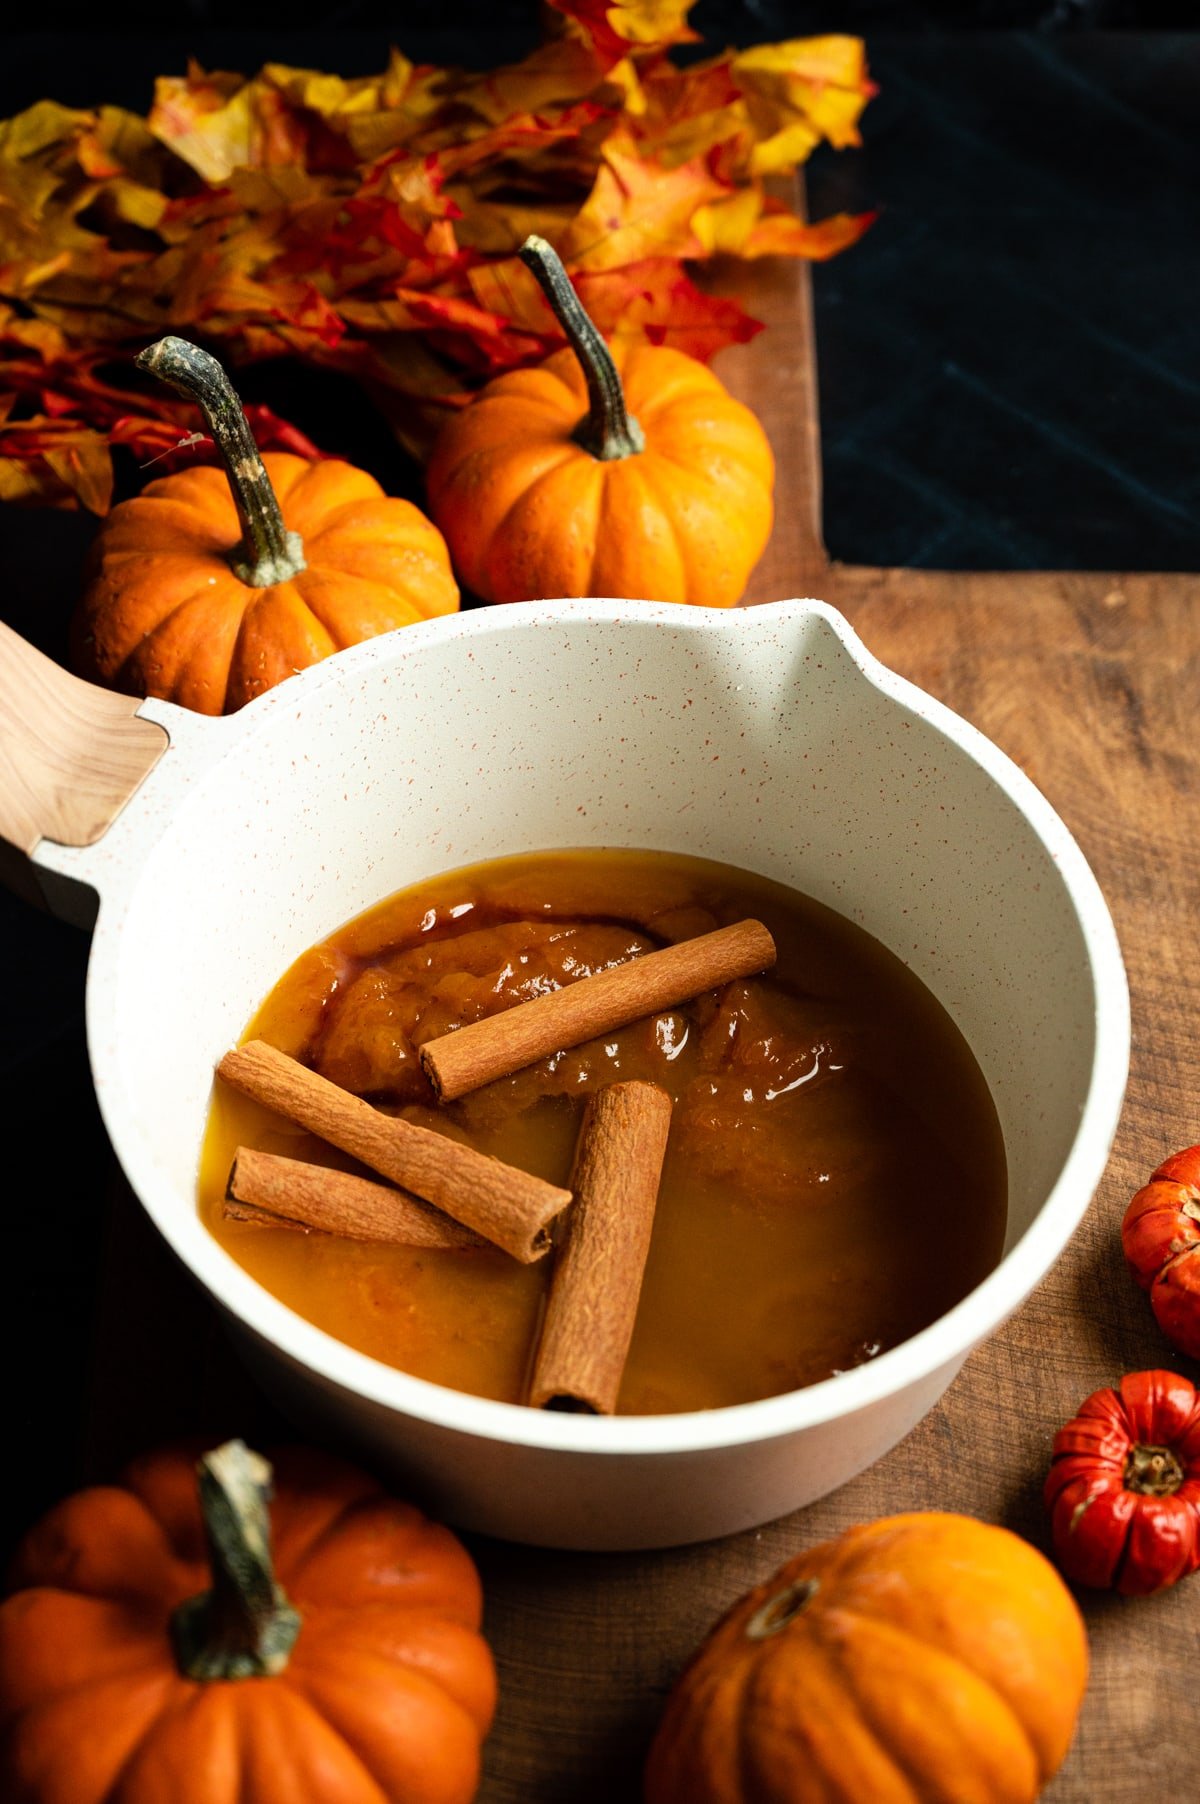 The pumpkin butter, maple syrup, water, and cinnamon in a small white pot.